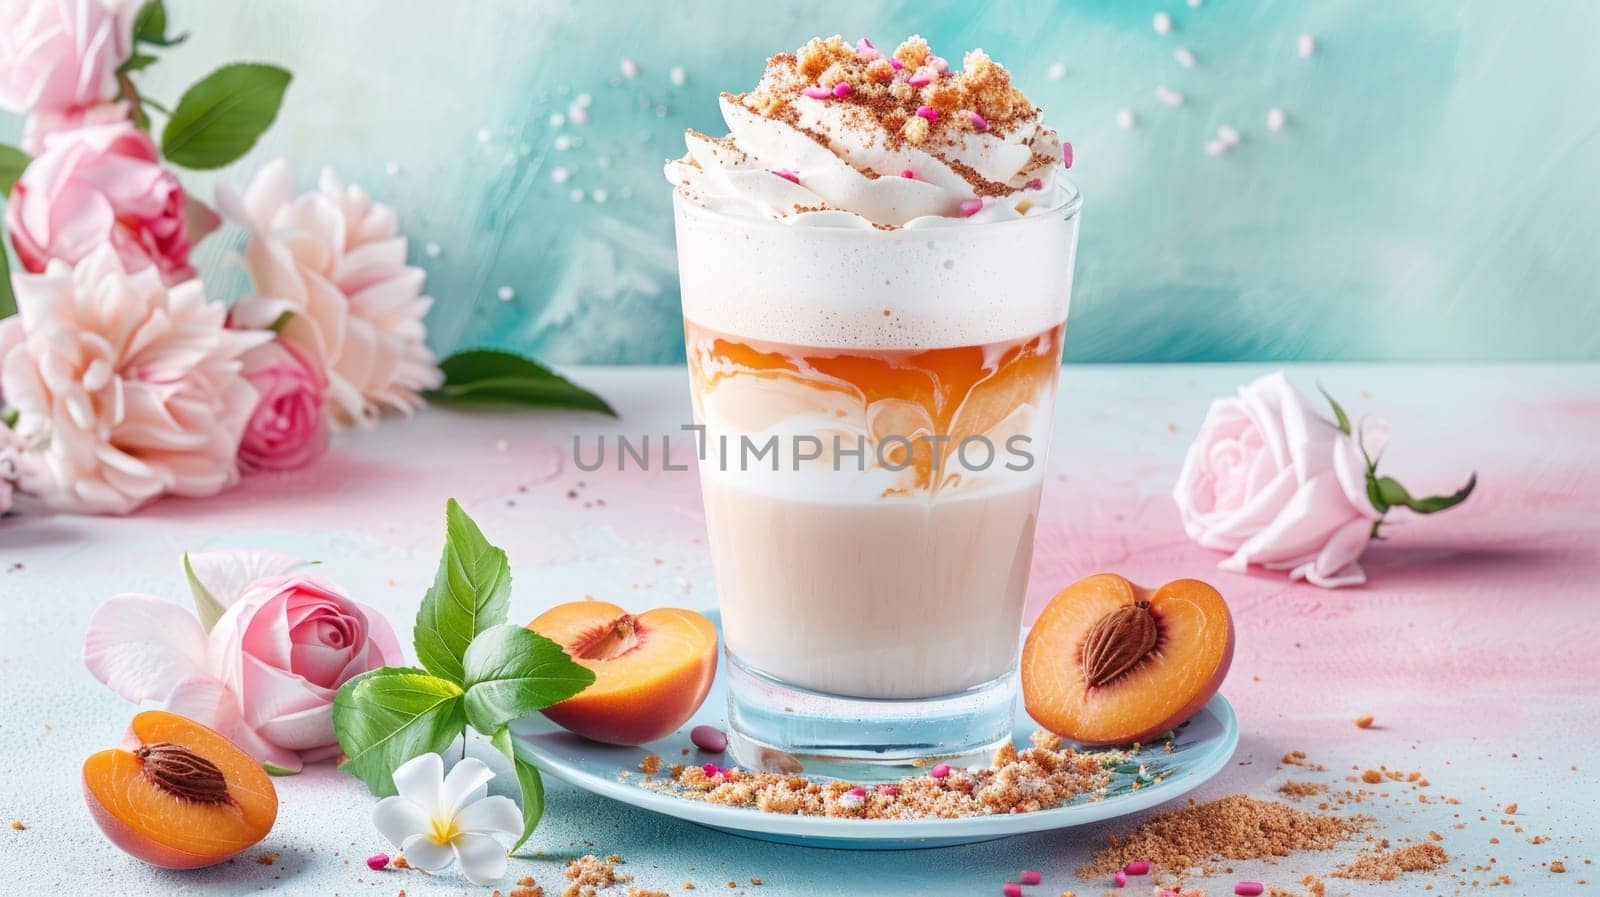 A glass of a drink with whipped cream and peach slices, AI by starush